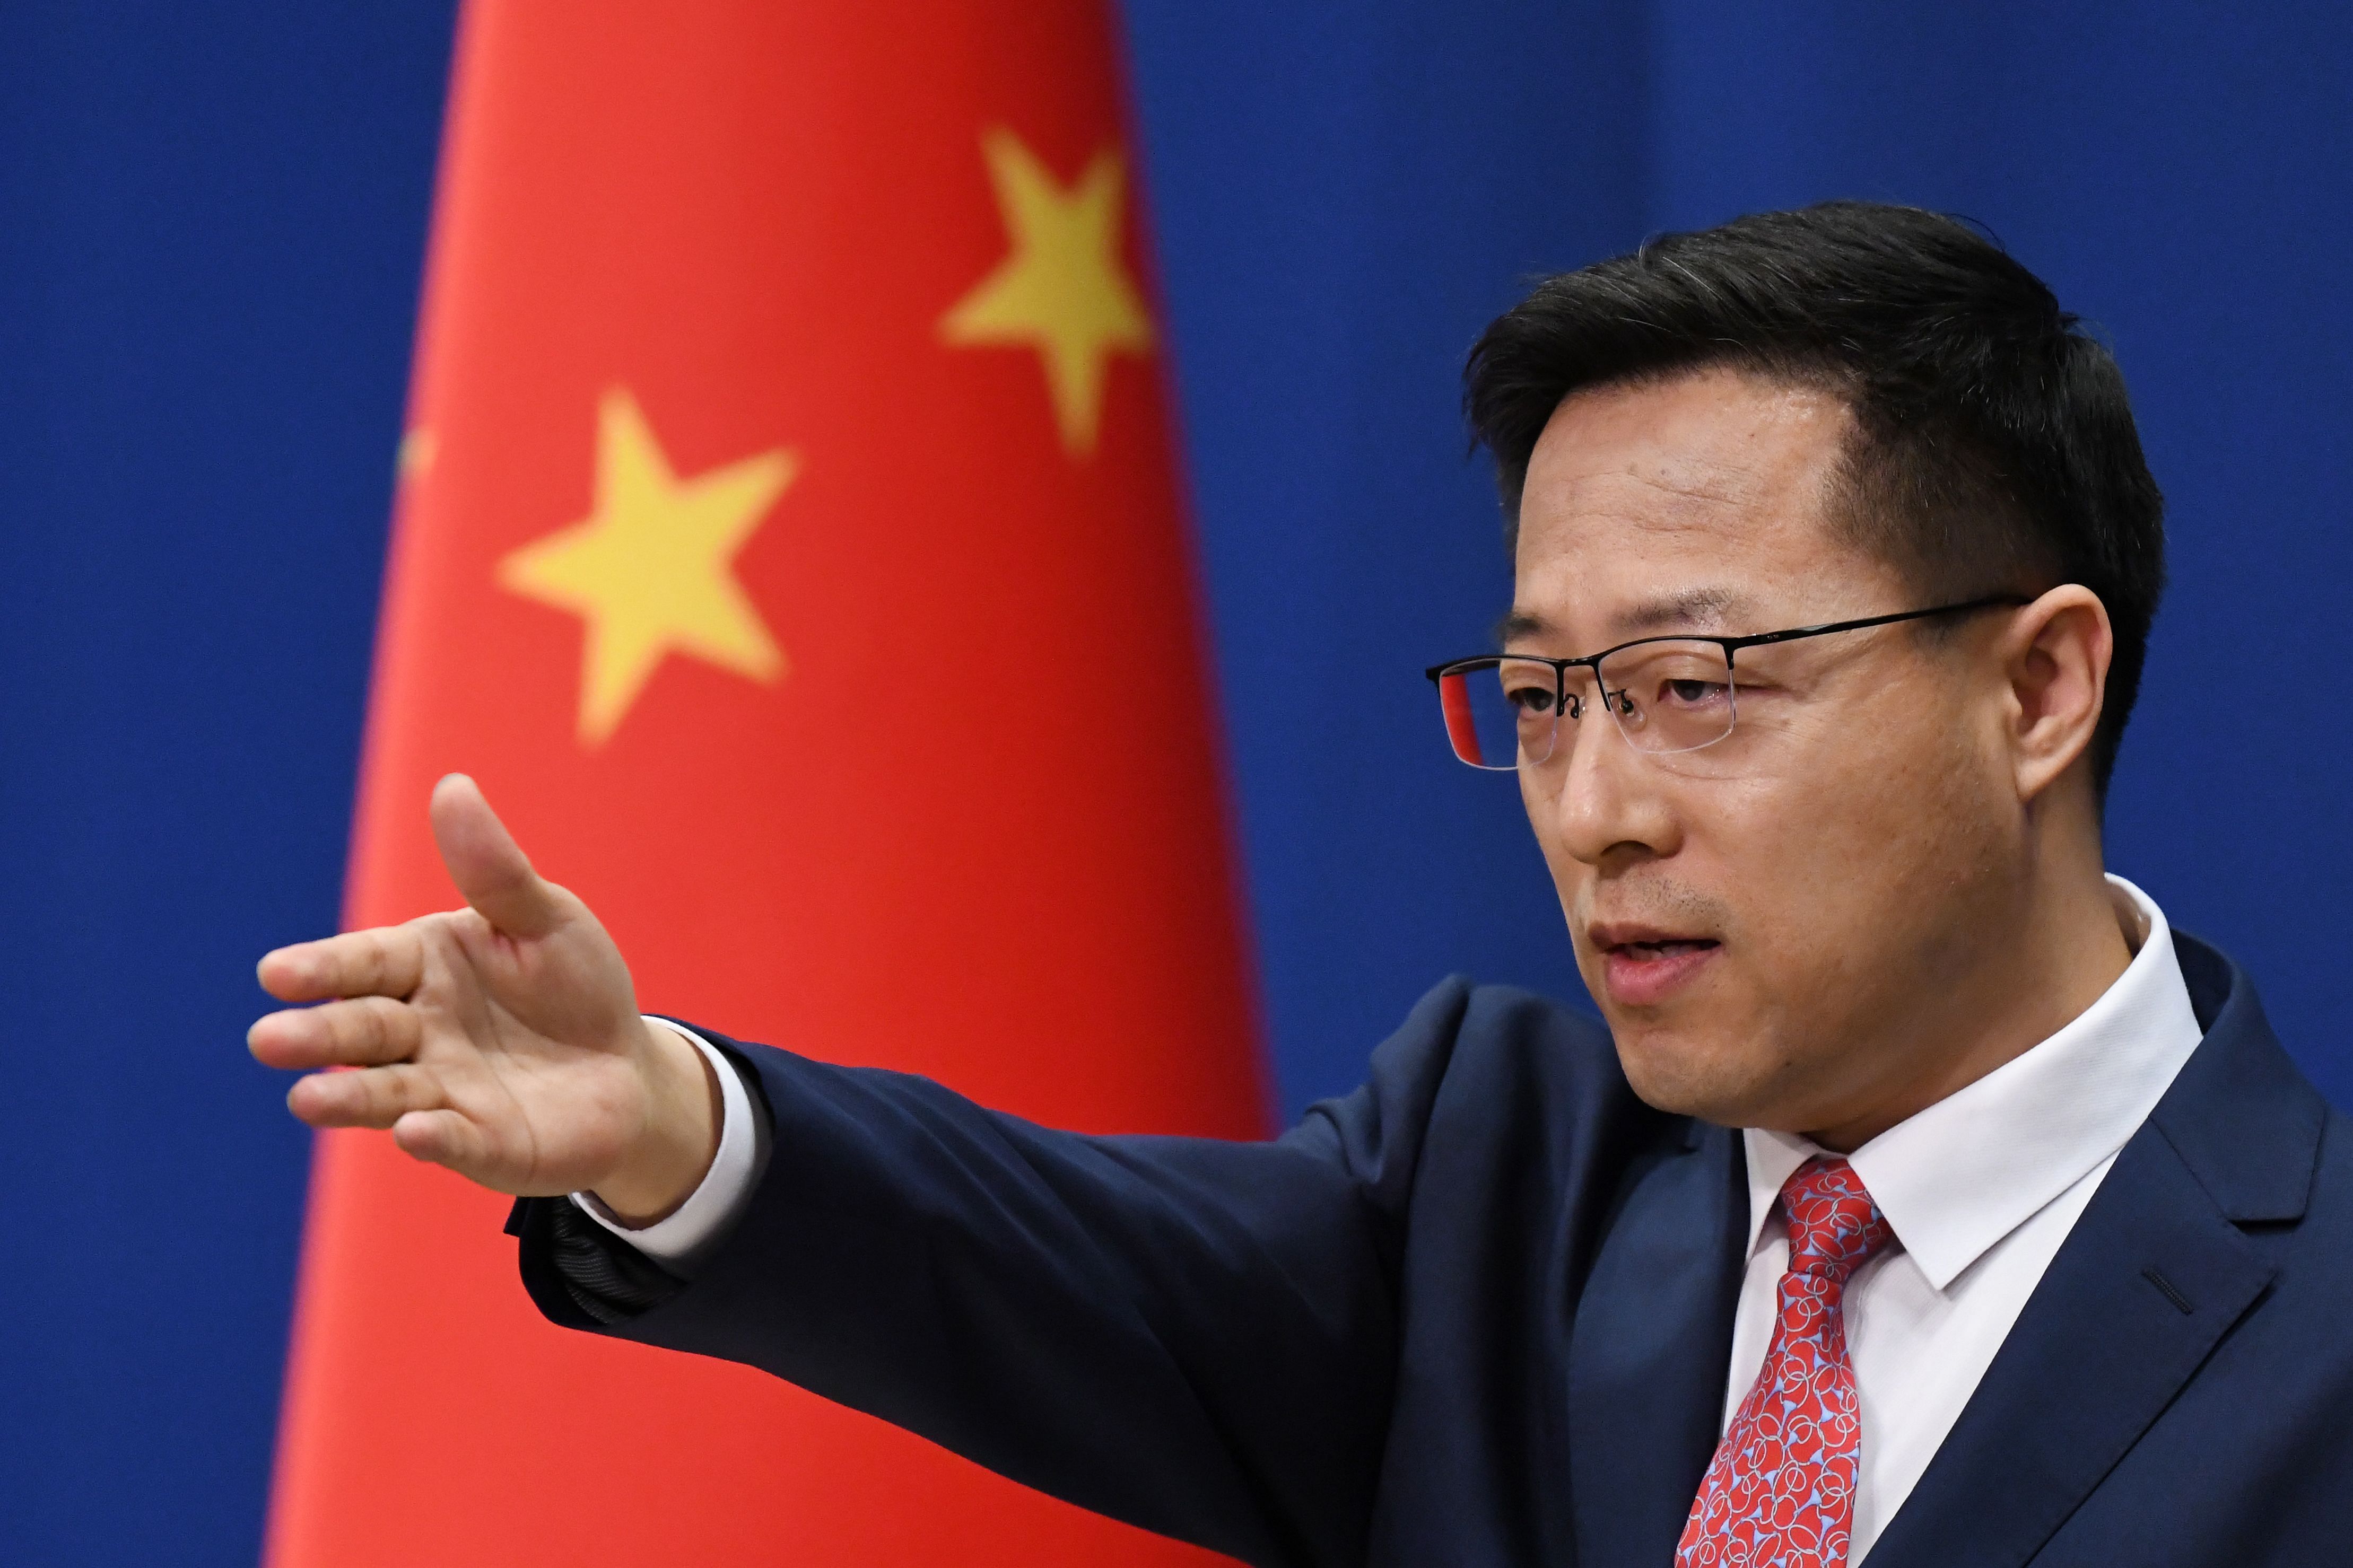 Zhao said London must "immediately stop interfering in Hong Kong's affairs and China's internal affairs, or this will definitely backfire." (Credit: AFP Photo)